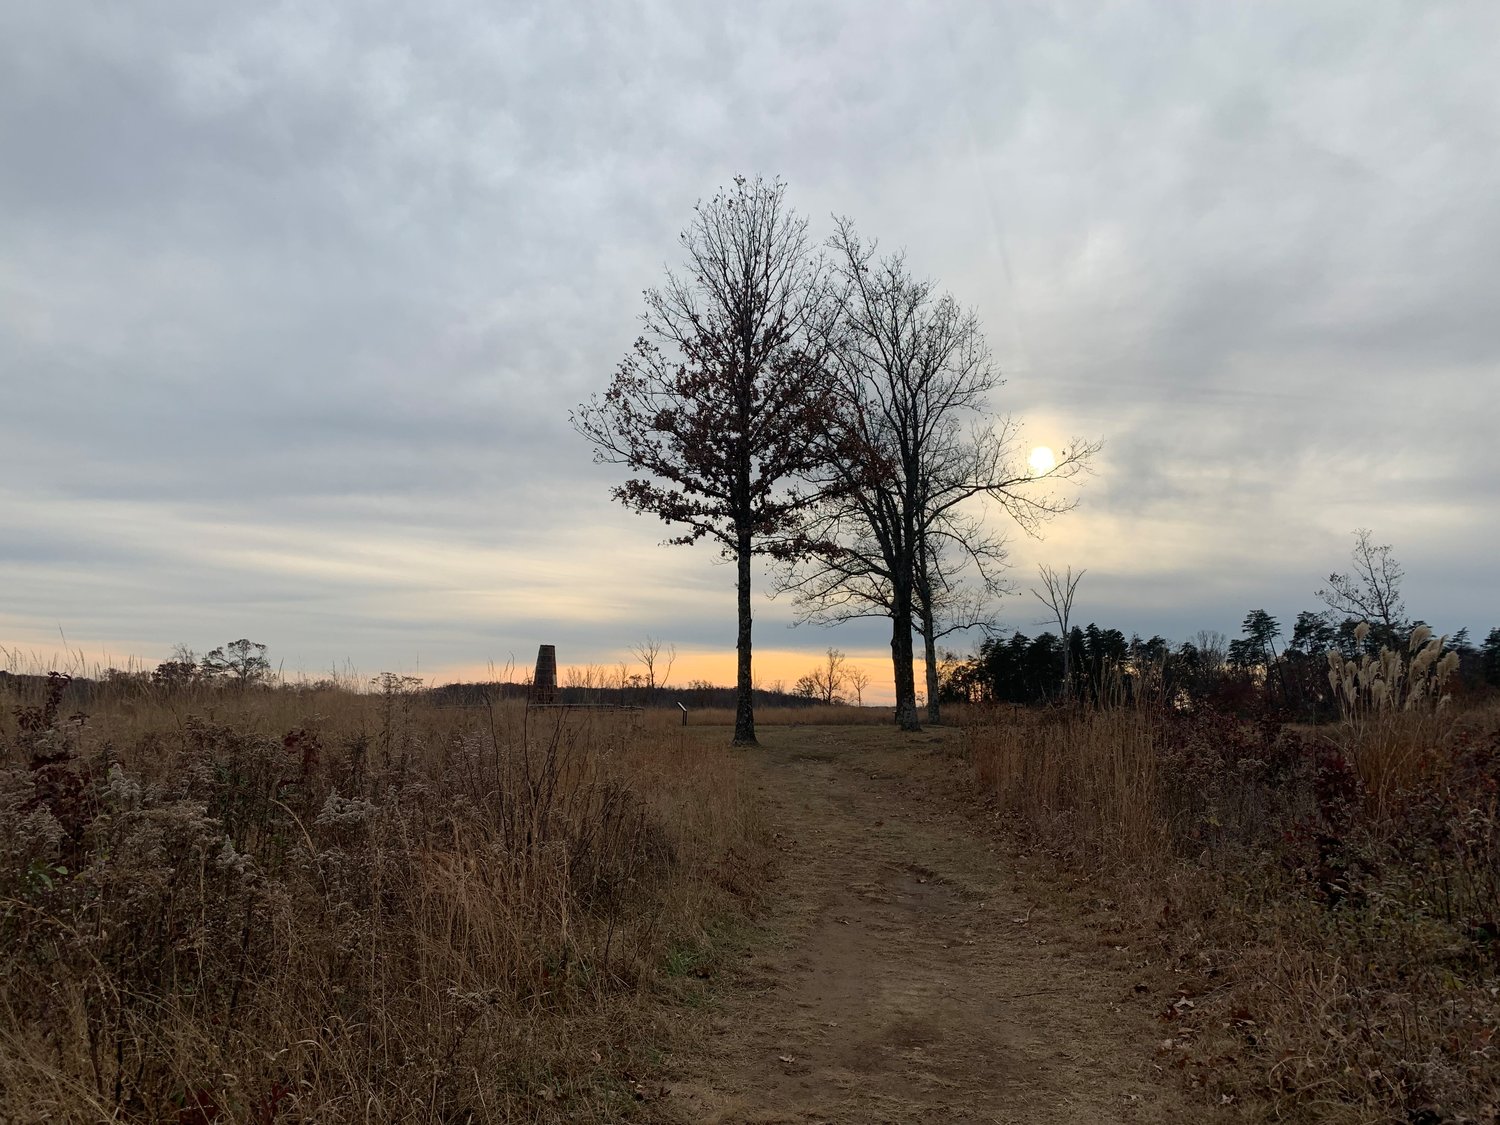 Trail circling the Battle of 2nd Manassas at the Bull Run/Manassas National Battlefield in late afternoon (Nov. 2021).